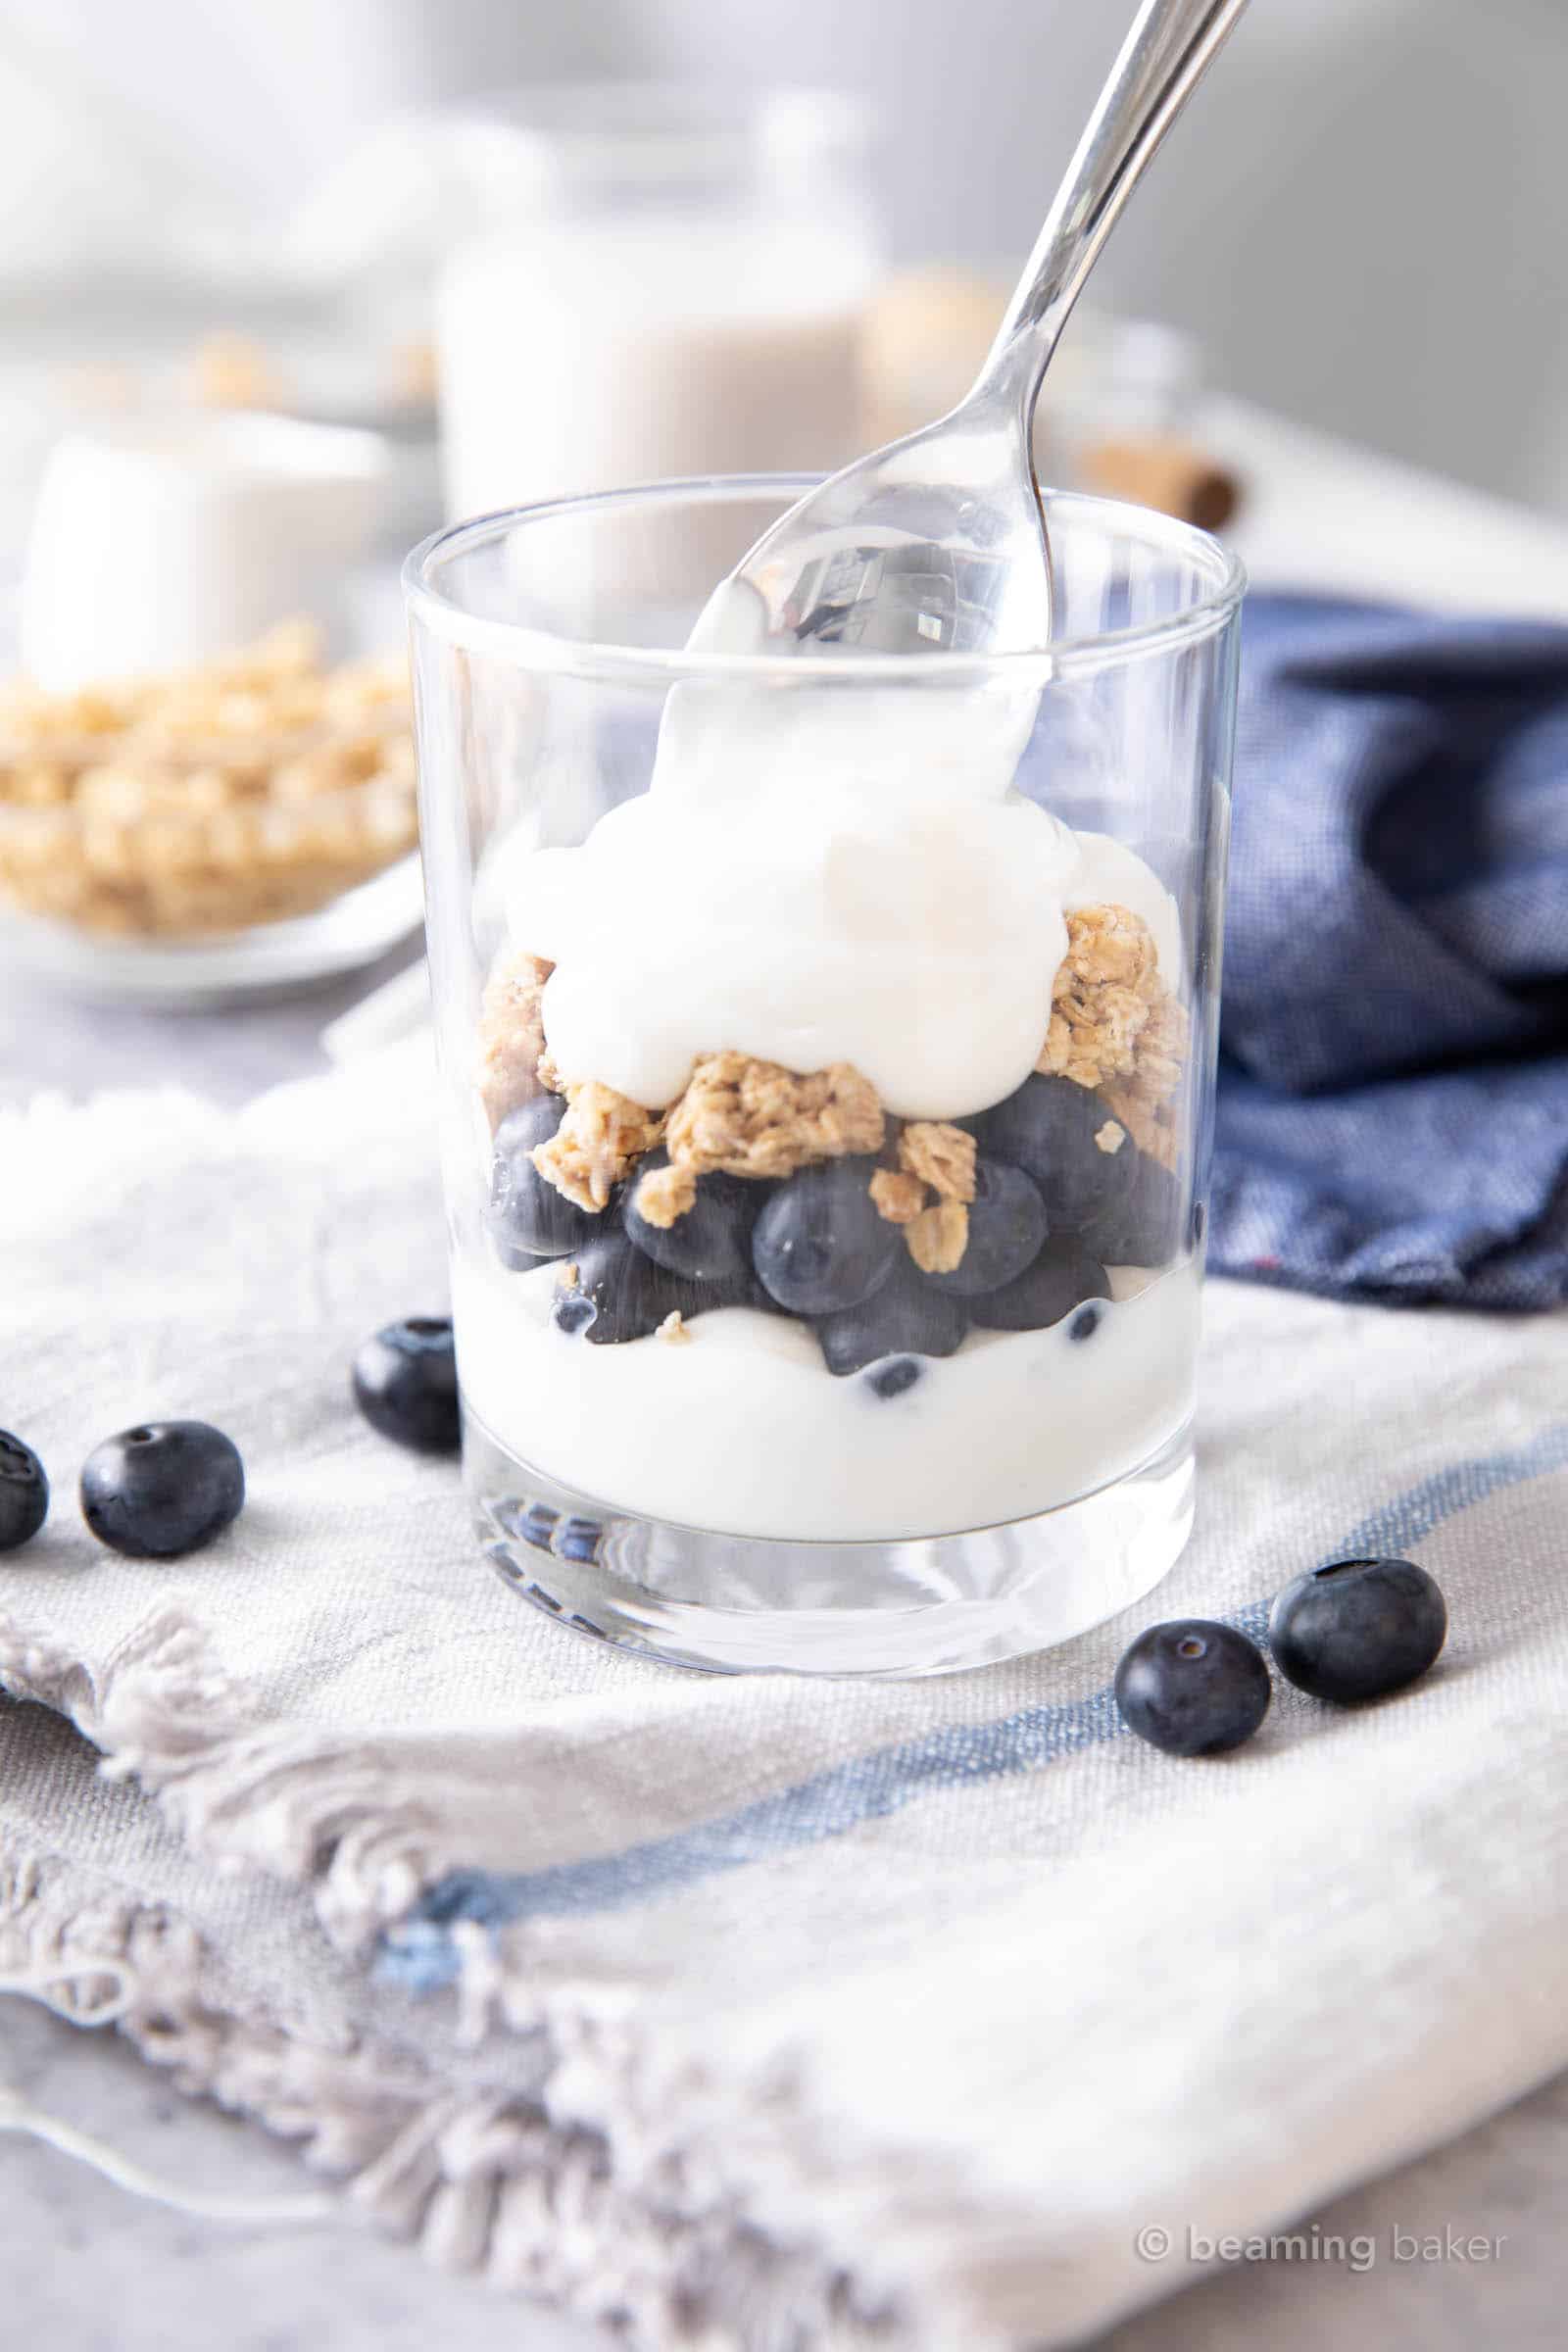 Spooning yogurt over the blueberry and granola layers in the blueberry parfait